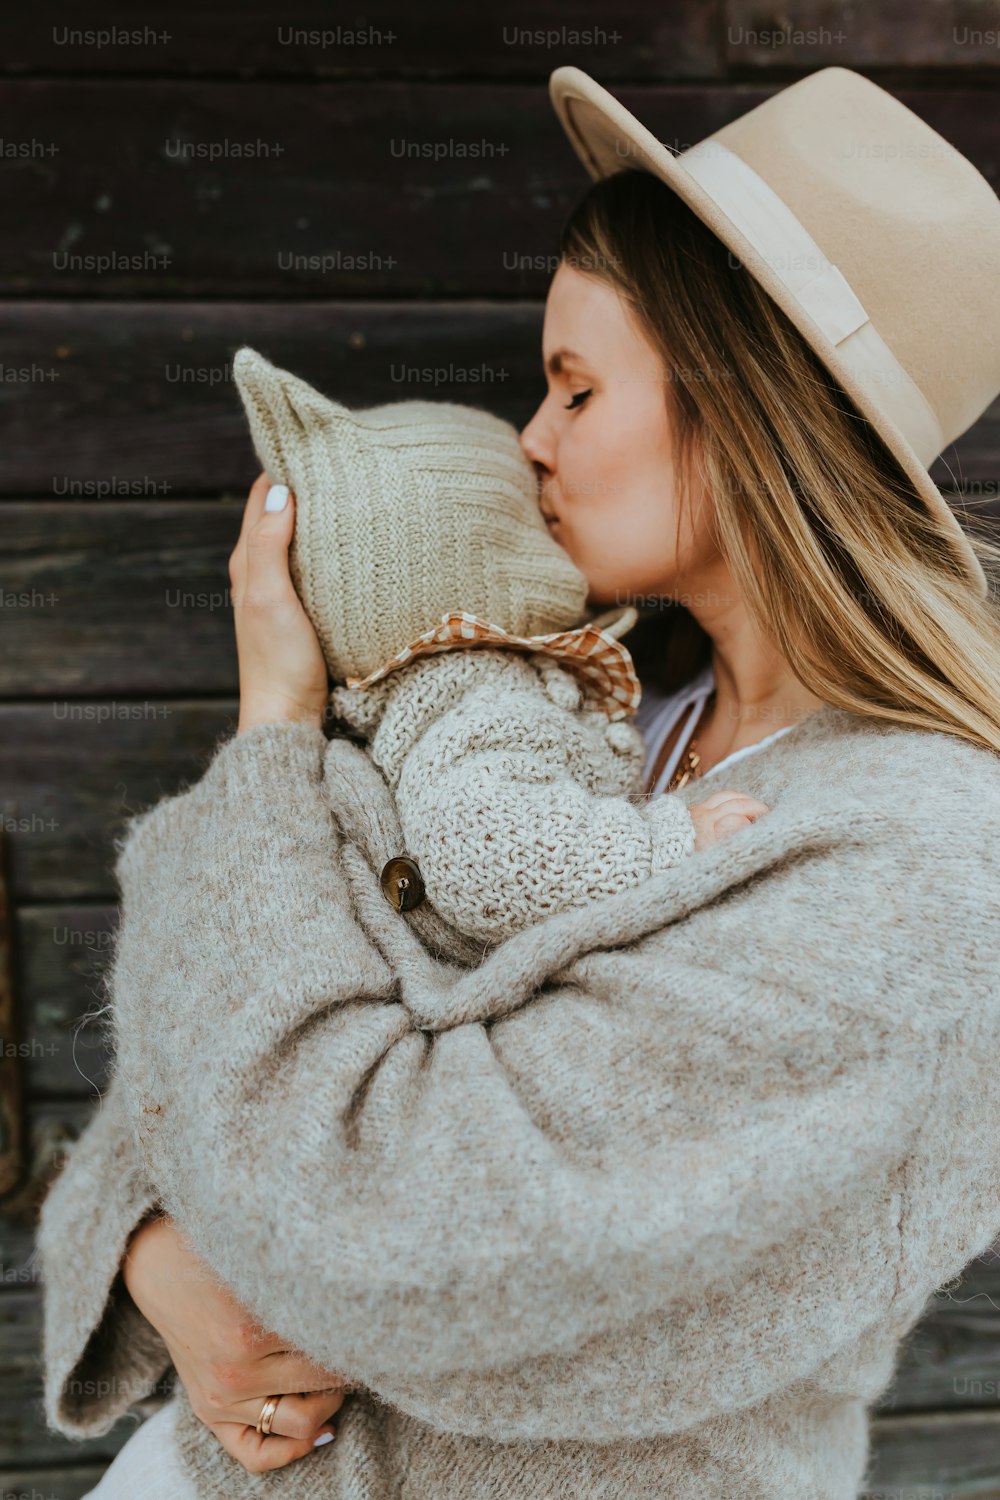 a woman in a hat and sweater holding a pillow